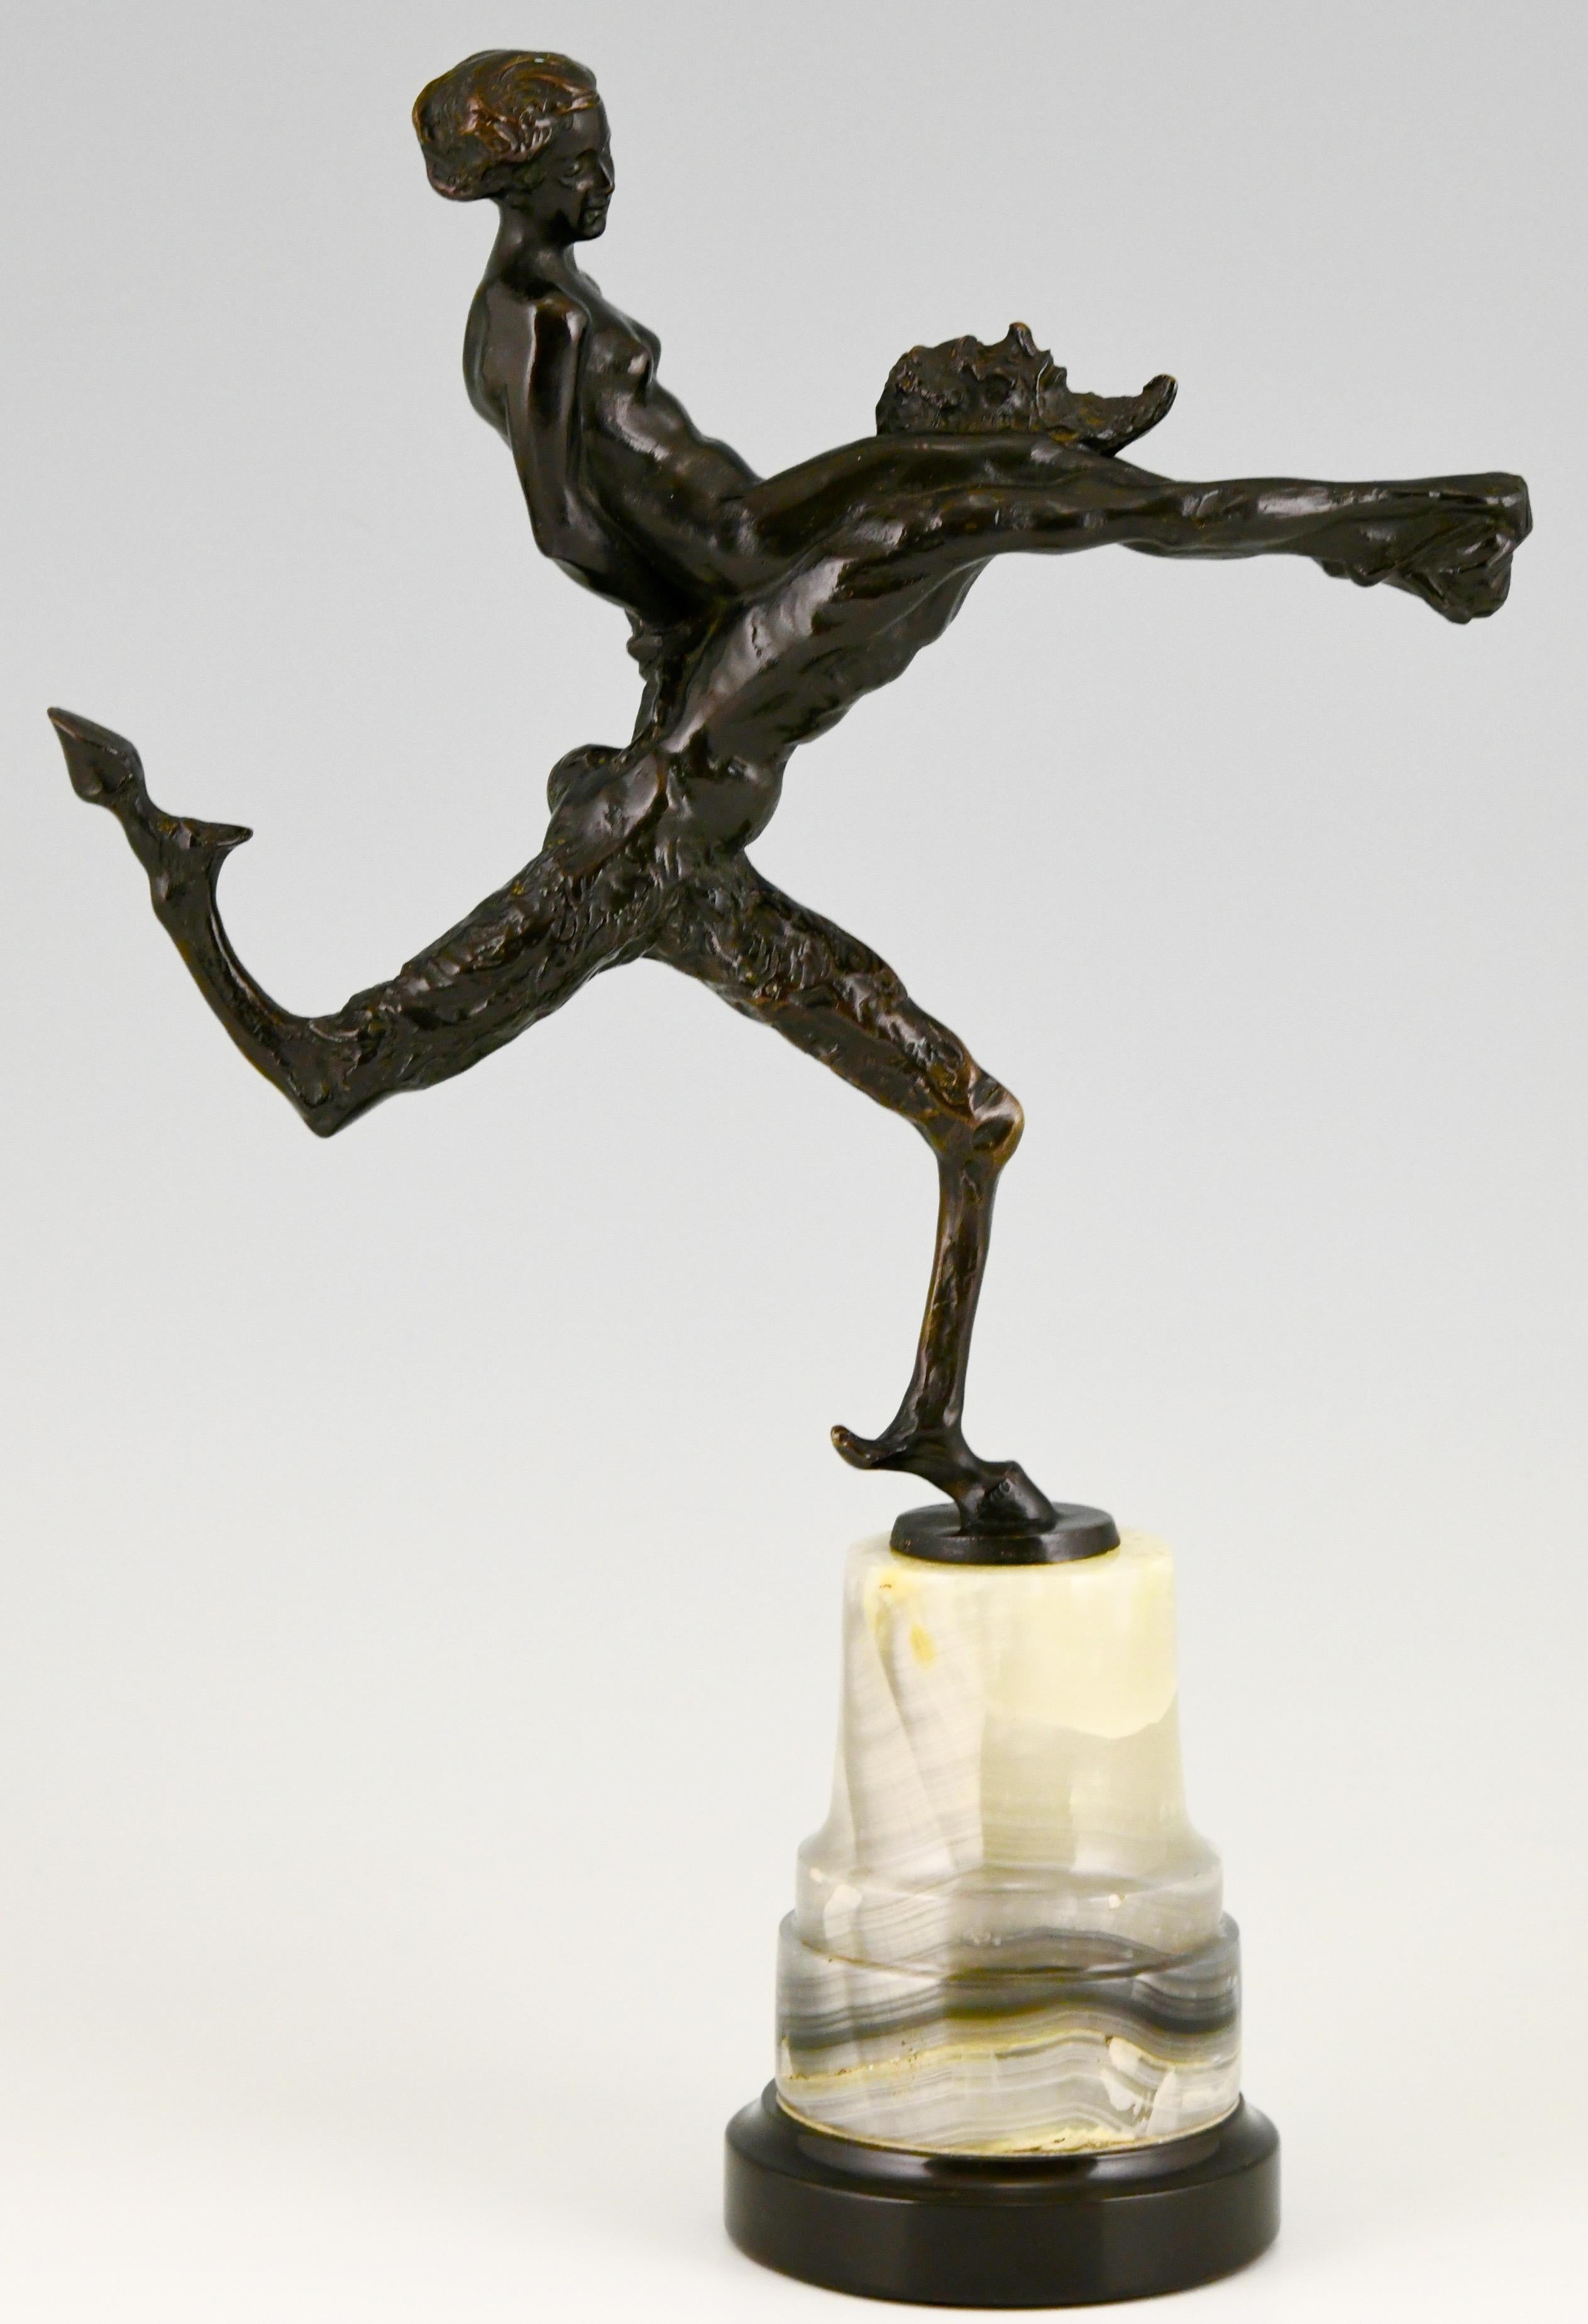 Art Nouveau bronze sculpture of a running satyr with a nude on his back.
By the German artist Hans Piffrader (1888-1950)
Beautiful patina and mounted on a fine circular marble base,
Ca. 1900. 

Literature:
“Dictionnaire des peintres,